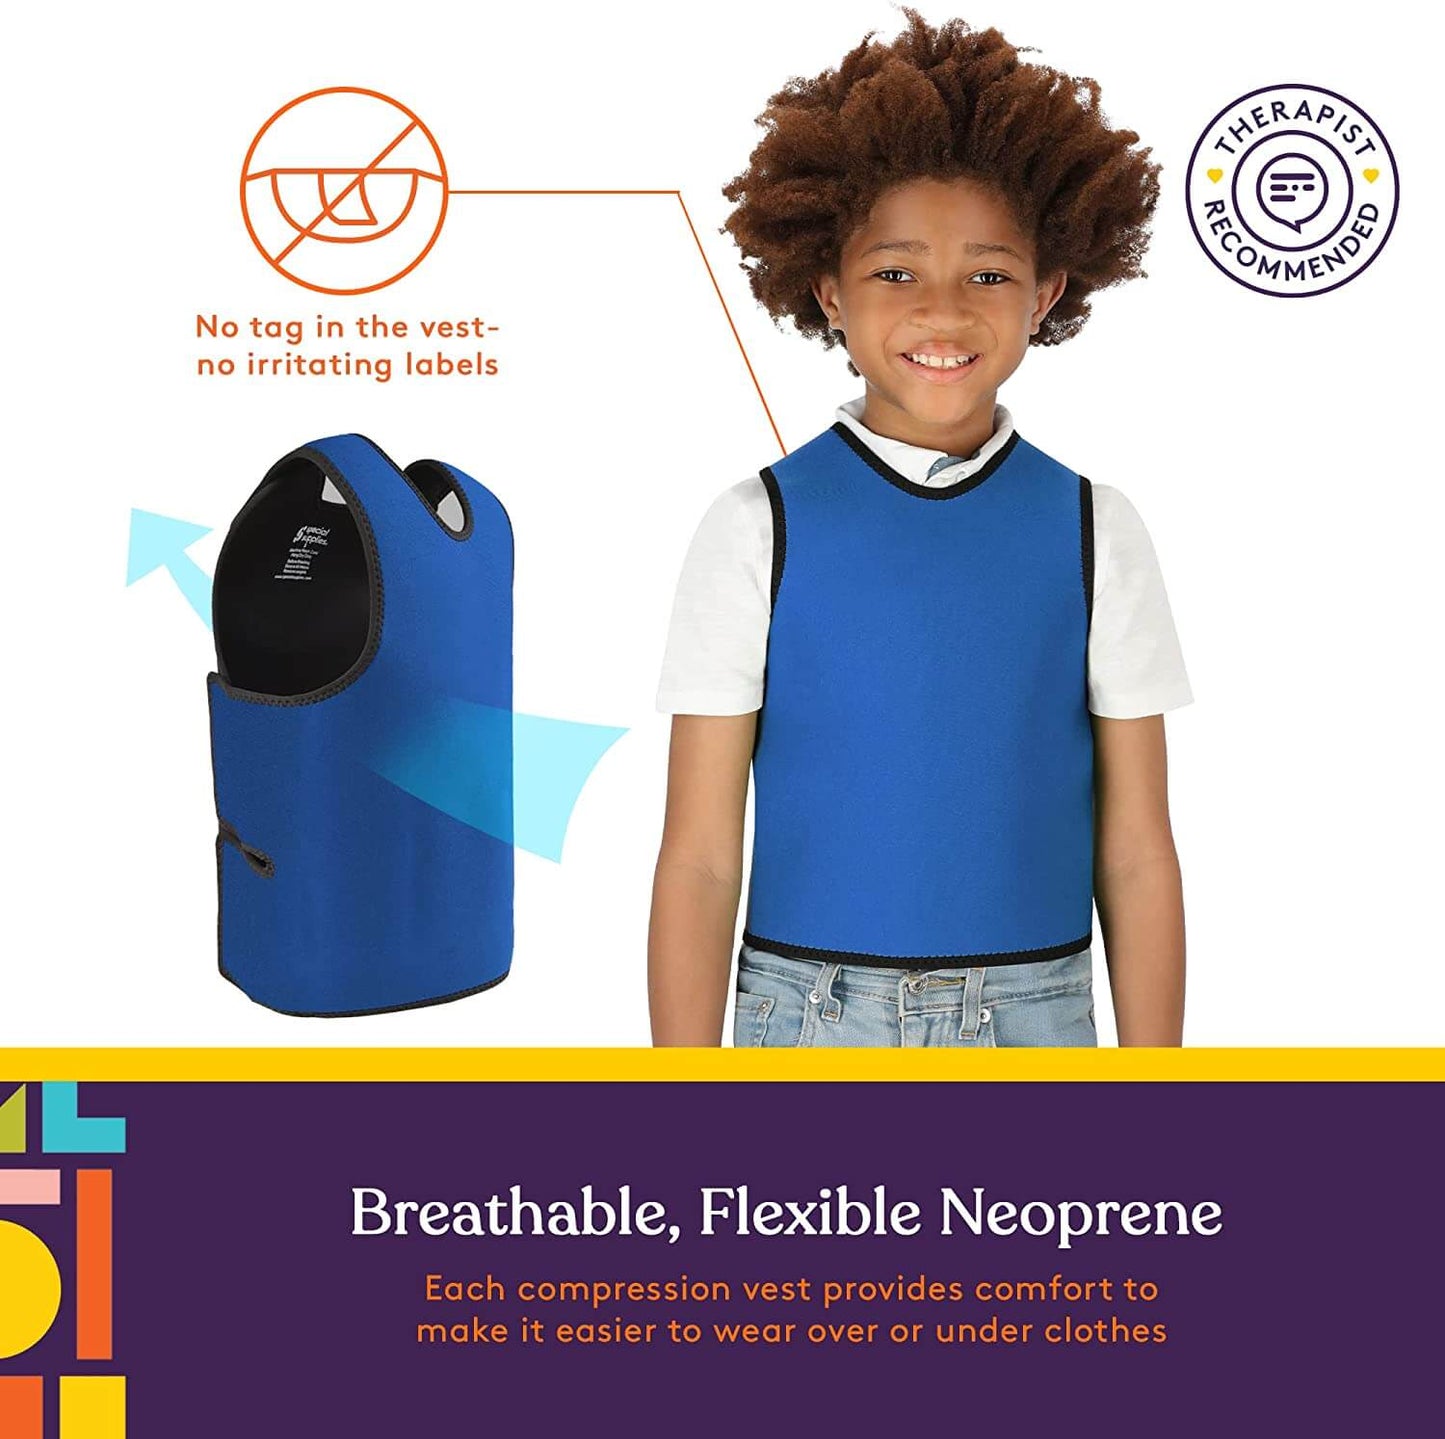 SensoryHarbor™-Sensory Compression Vest for Autism and Sensory Processing Disorders